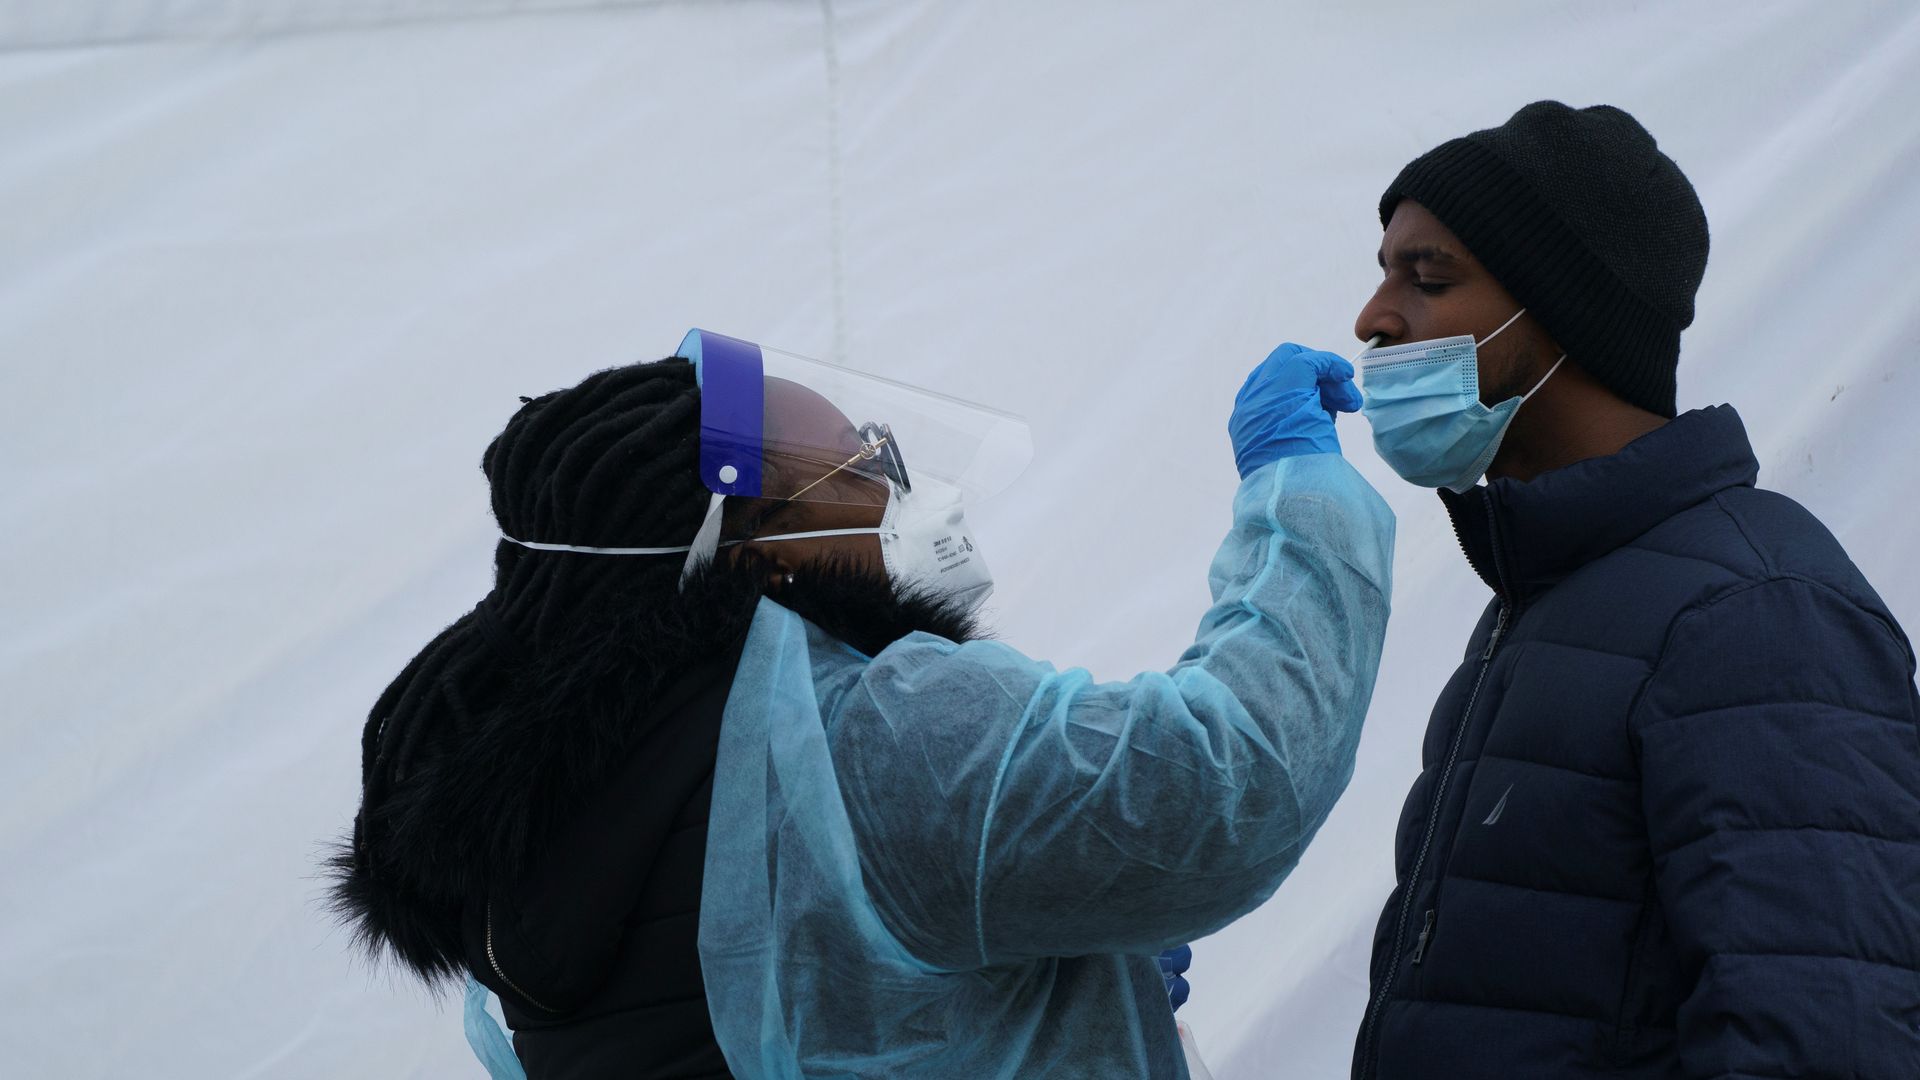 A medical worker takes a nasal swab sample from a man for COVID-19 testing in Washington, D.C., 